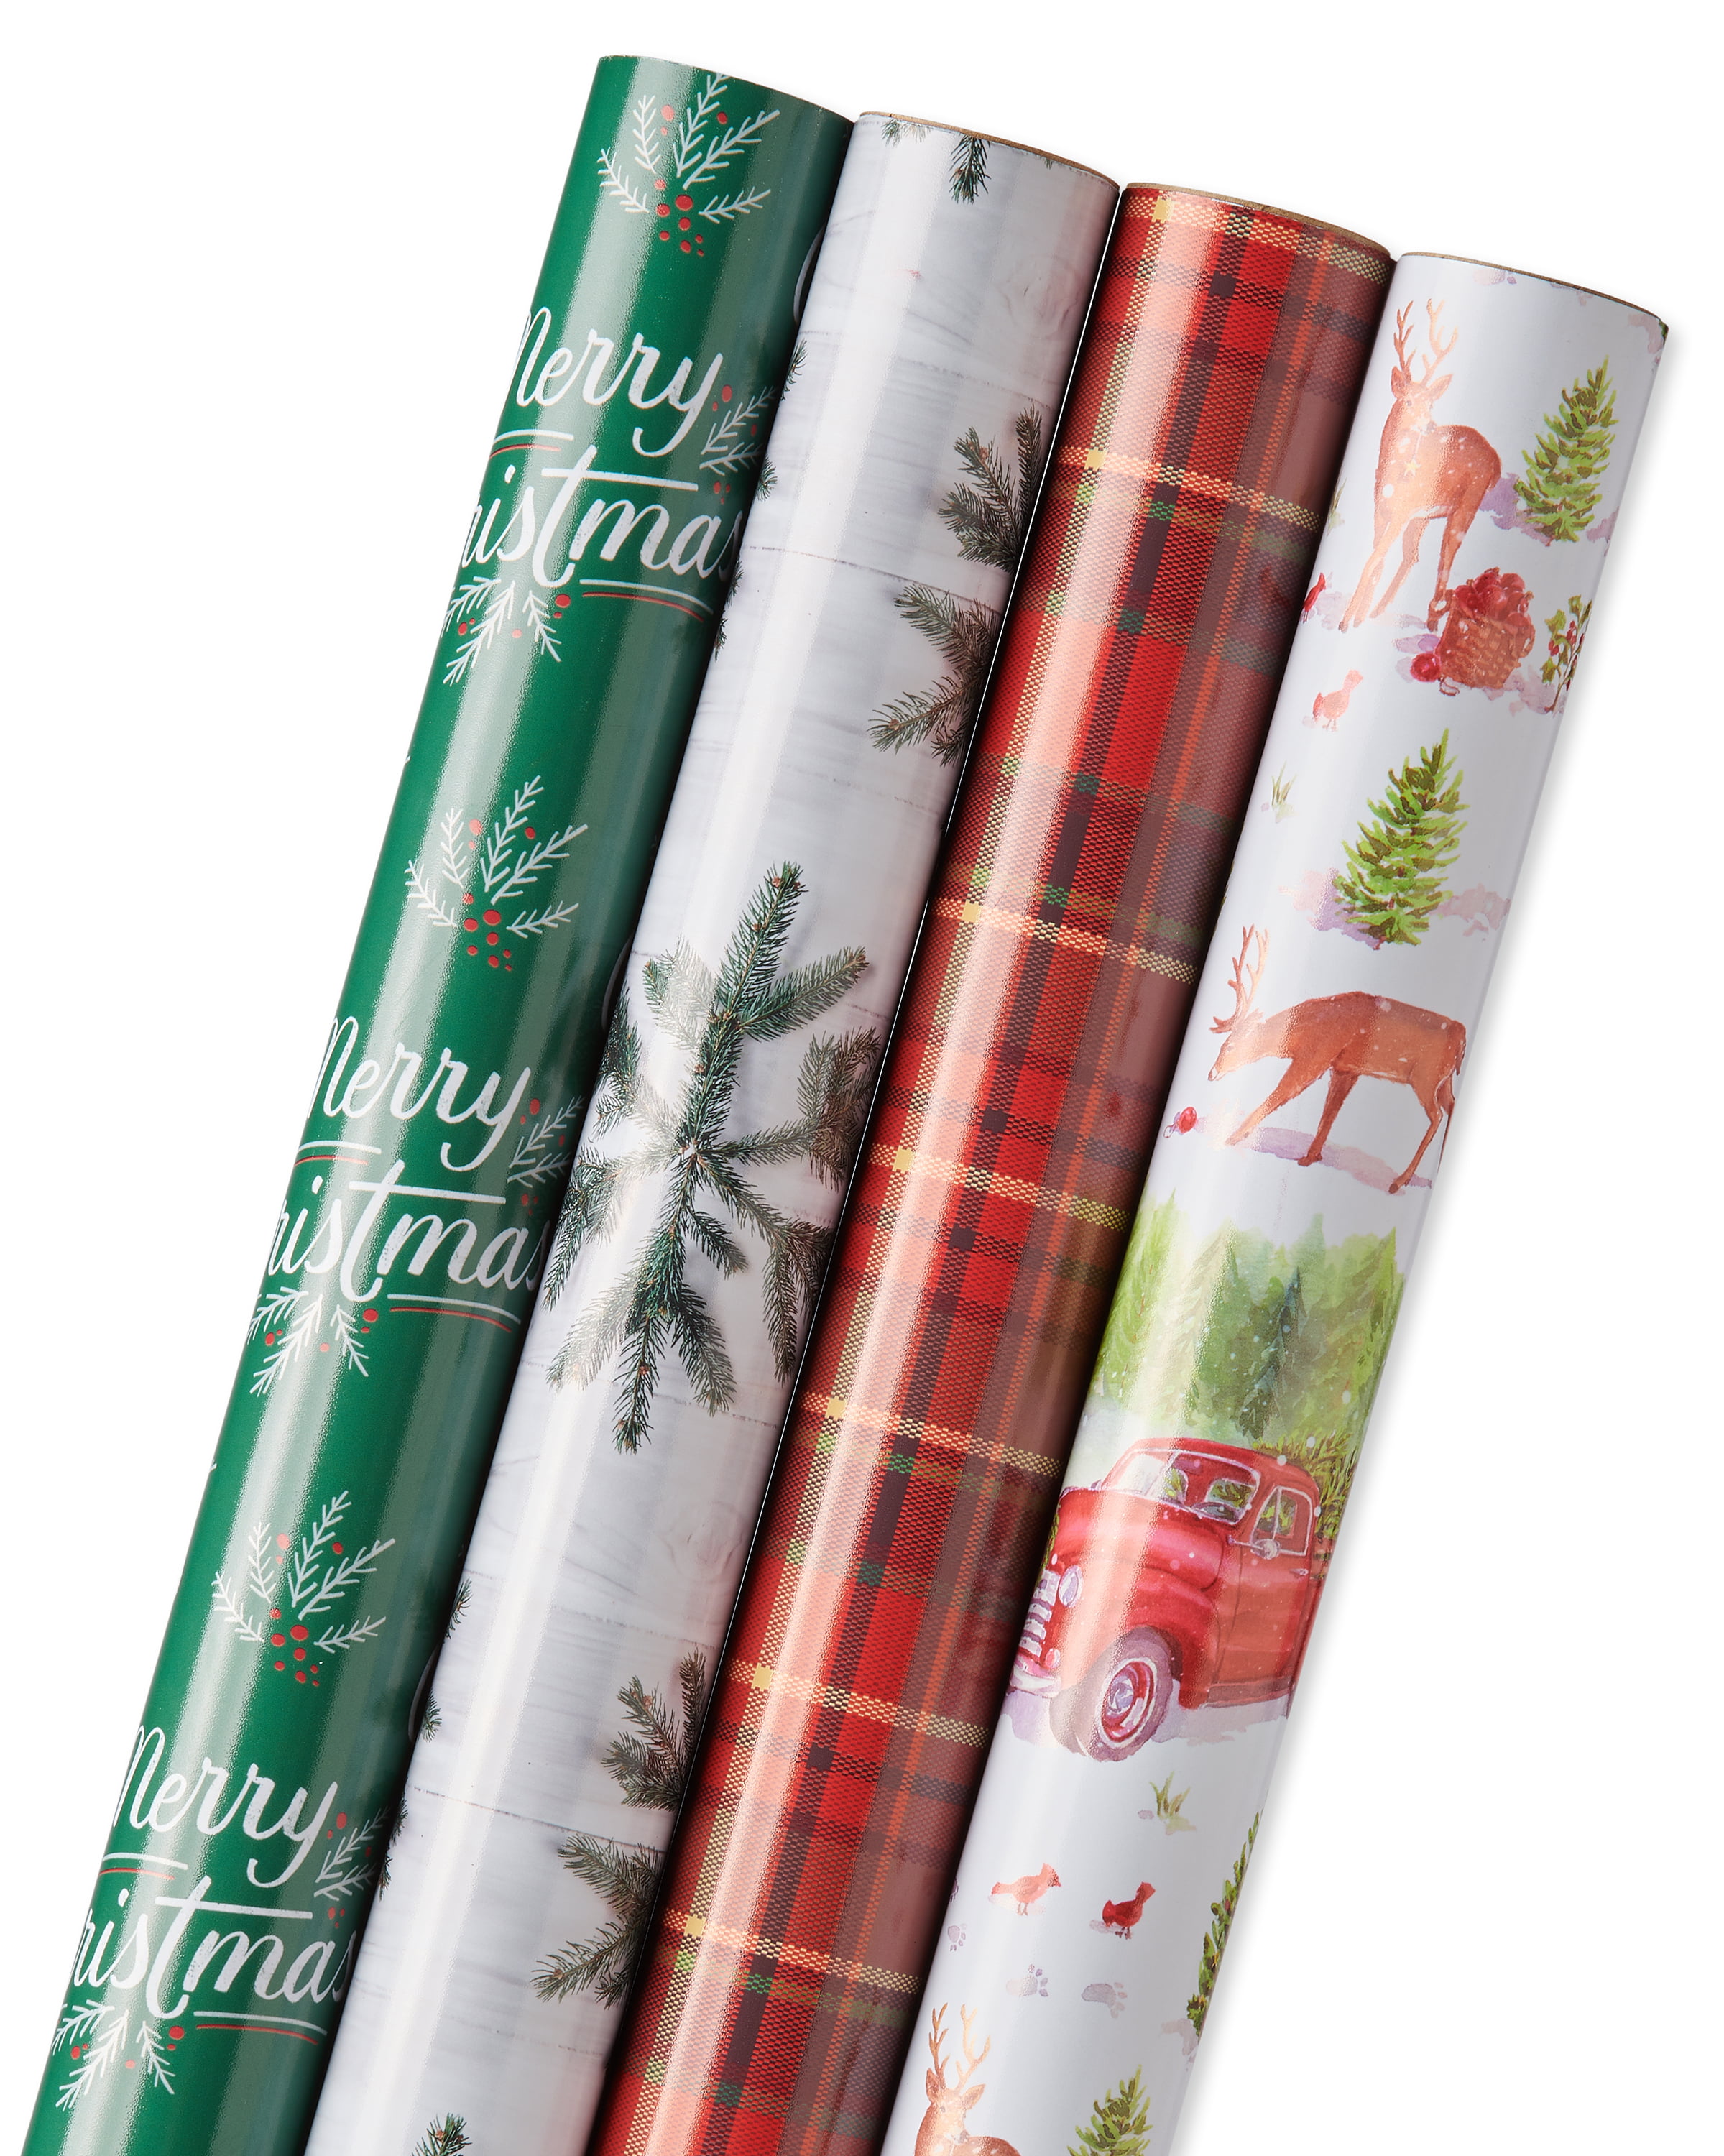 2 NEW ROLLS OF STAR WARS CHRISTMAS WRAPPING PAPER 80 SQ FOOT 3.33 FEET X 8 YARDS 